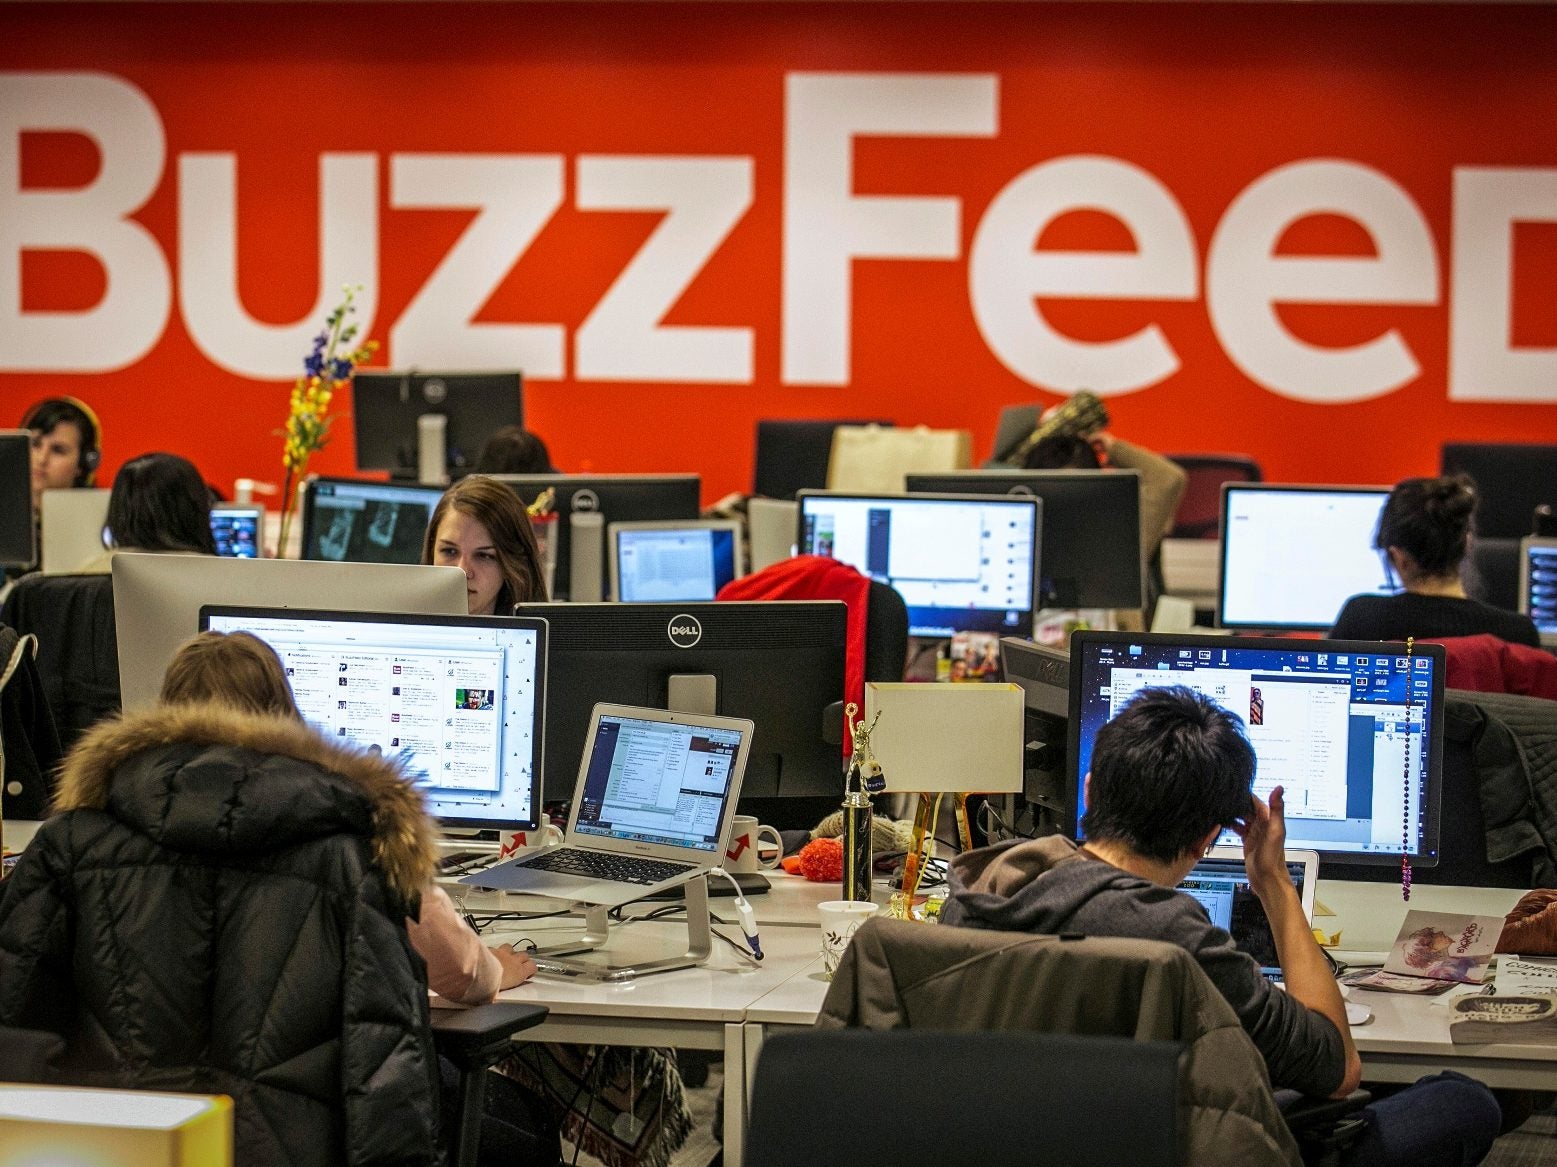 Buzzfeed News editors quit and cuts to come as company falls short of revenue forecast